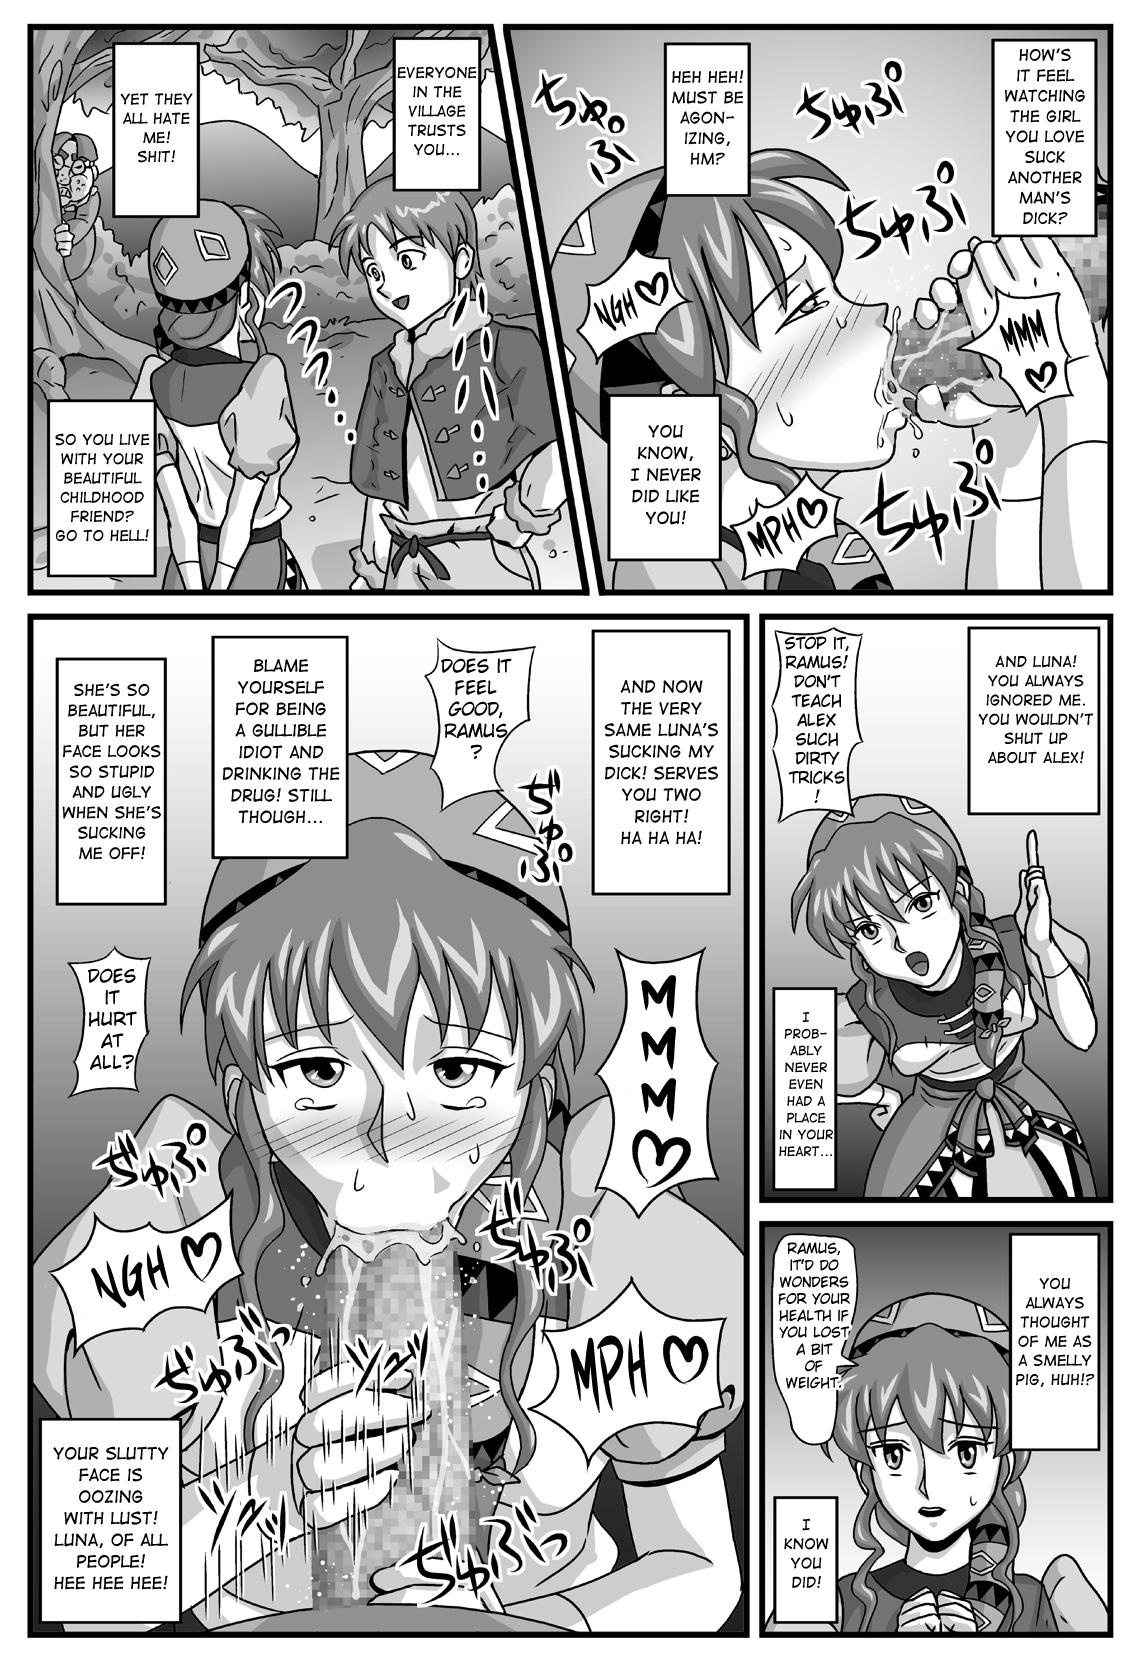 Freak The Cumdumpster Princess of Burg 01 - Lunar silver star story Couples Fucking - Page 9